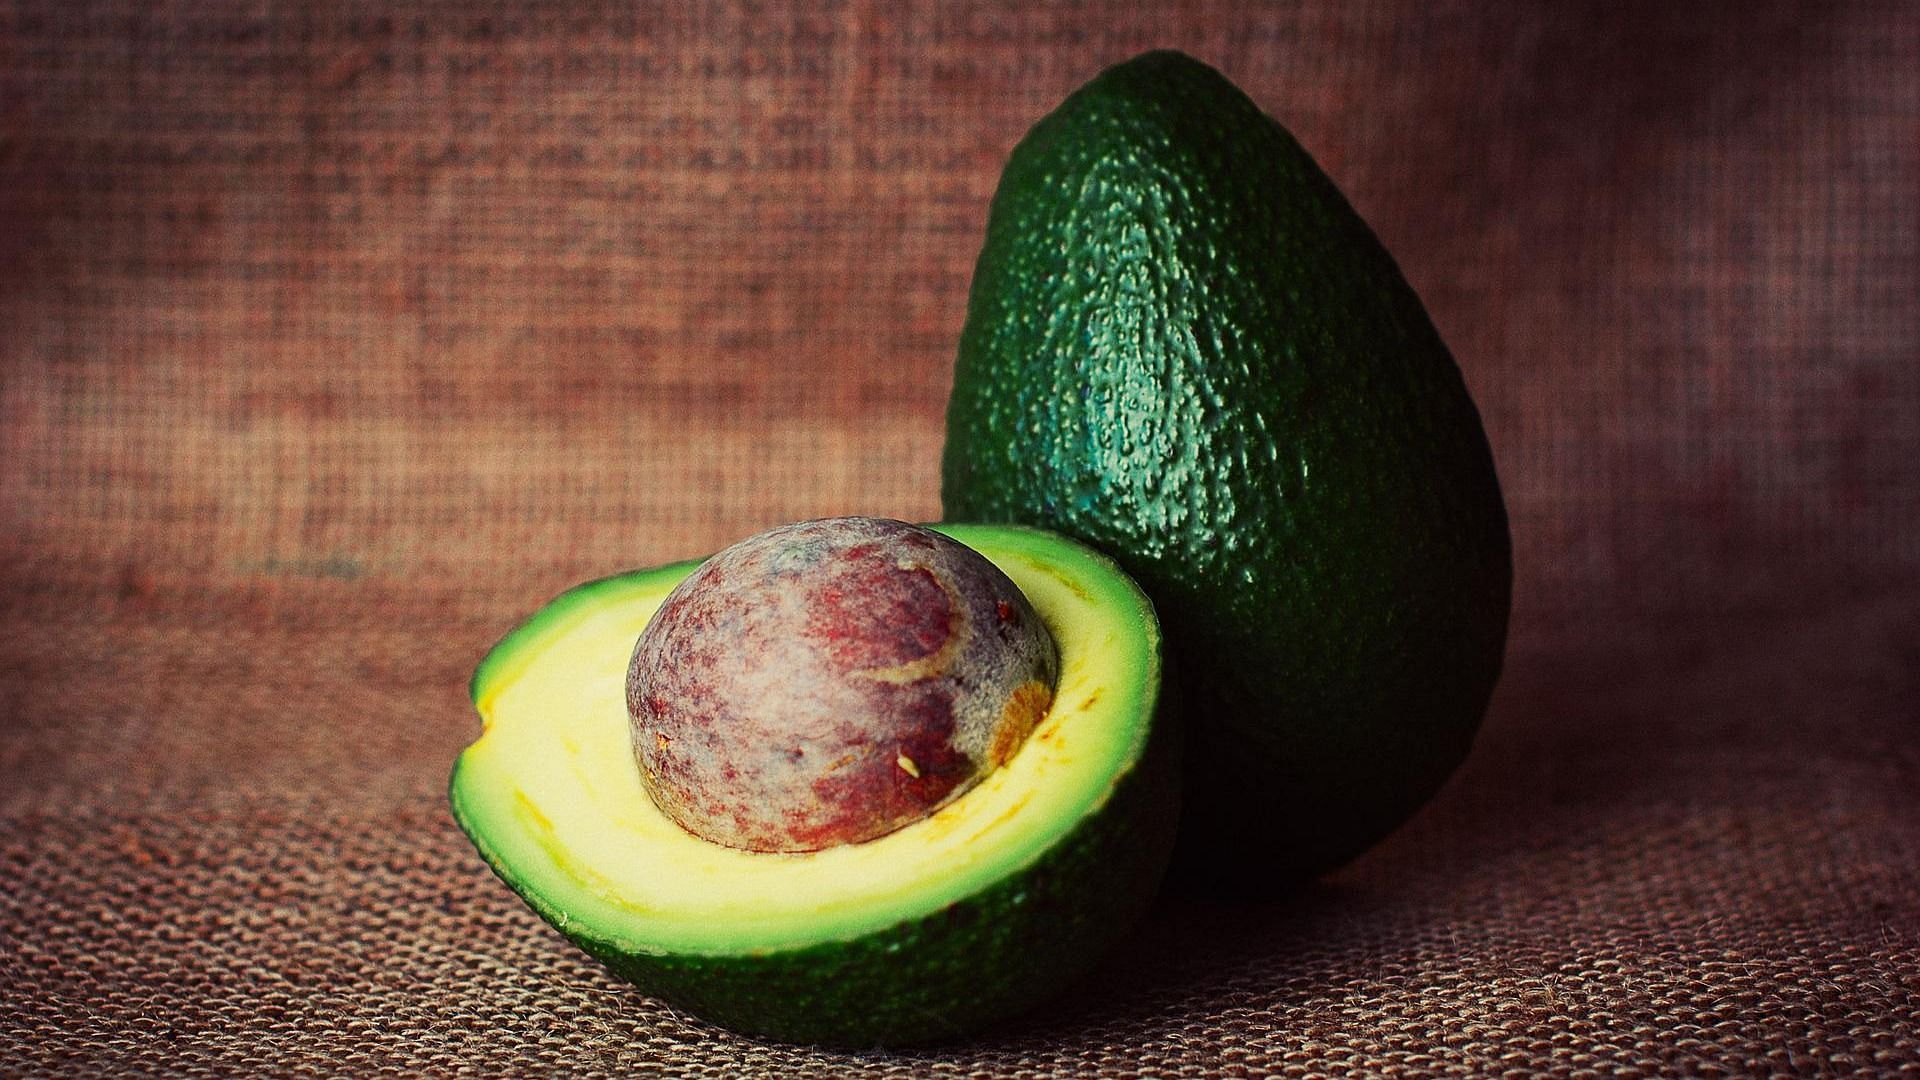 FDA warns against the viral TikTok hack that stores avocados in water to preserve them for longer (Image via tookapic/Pixabay)